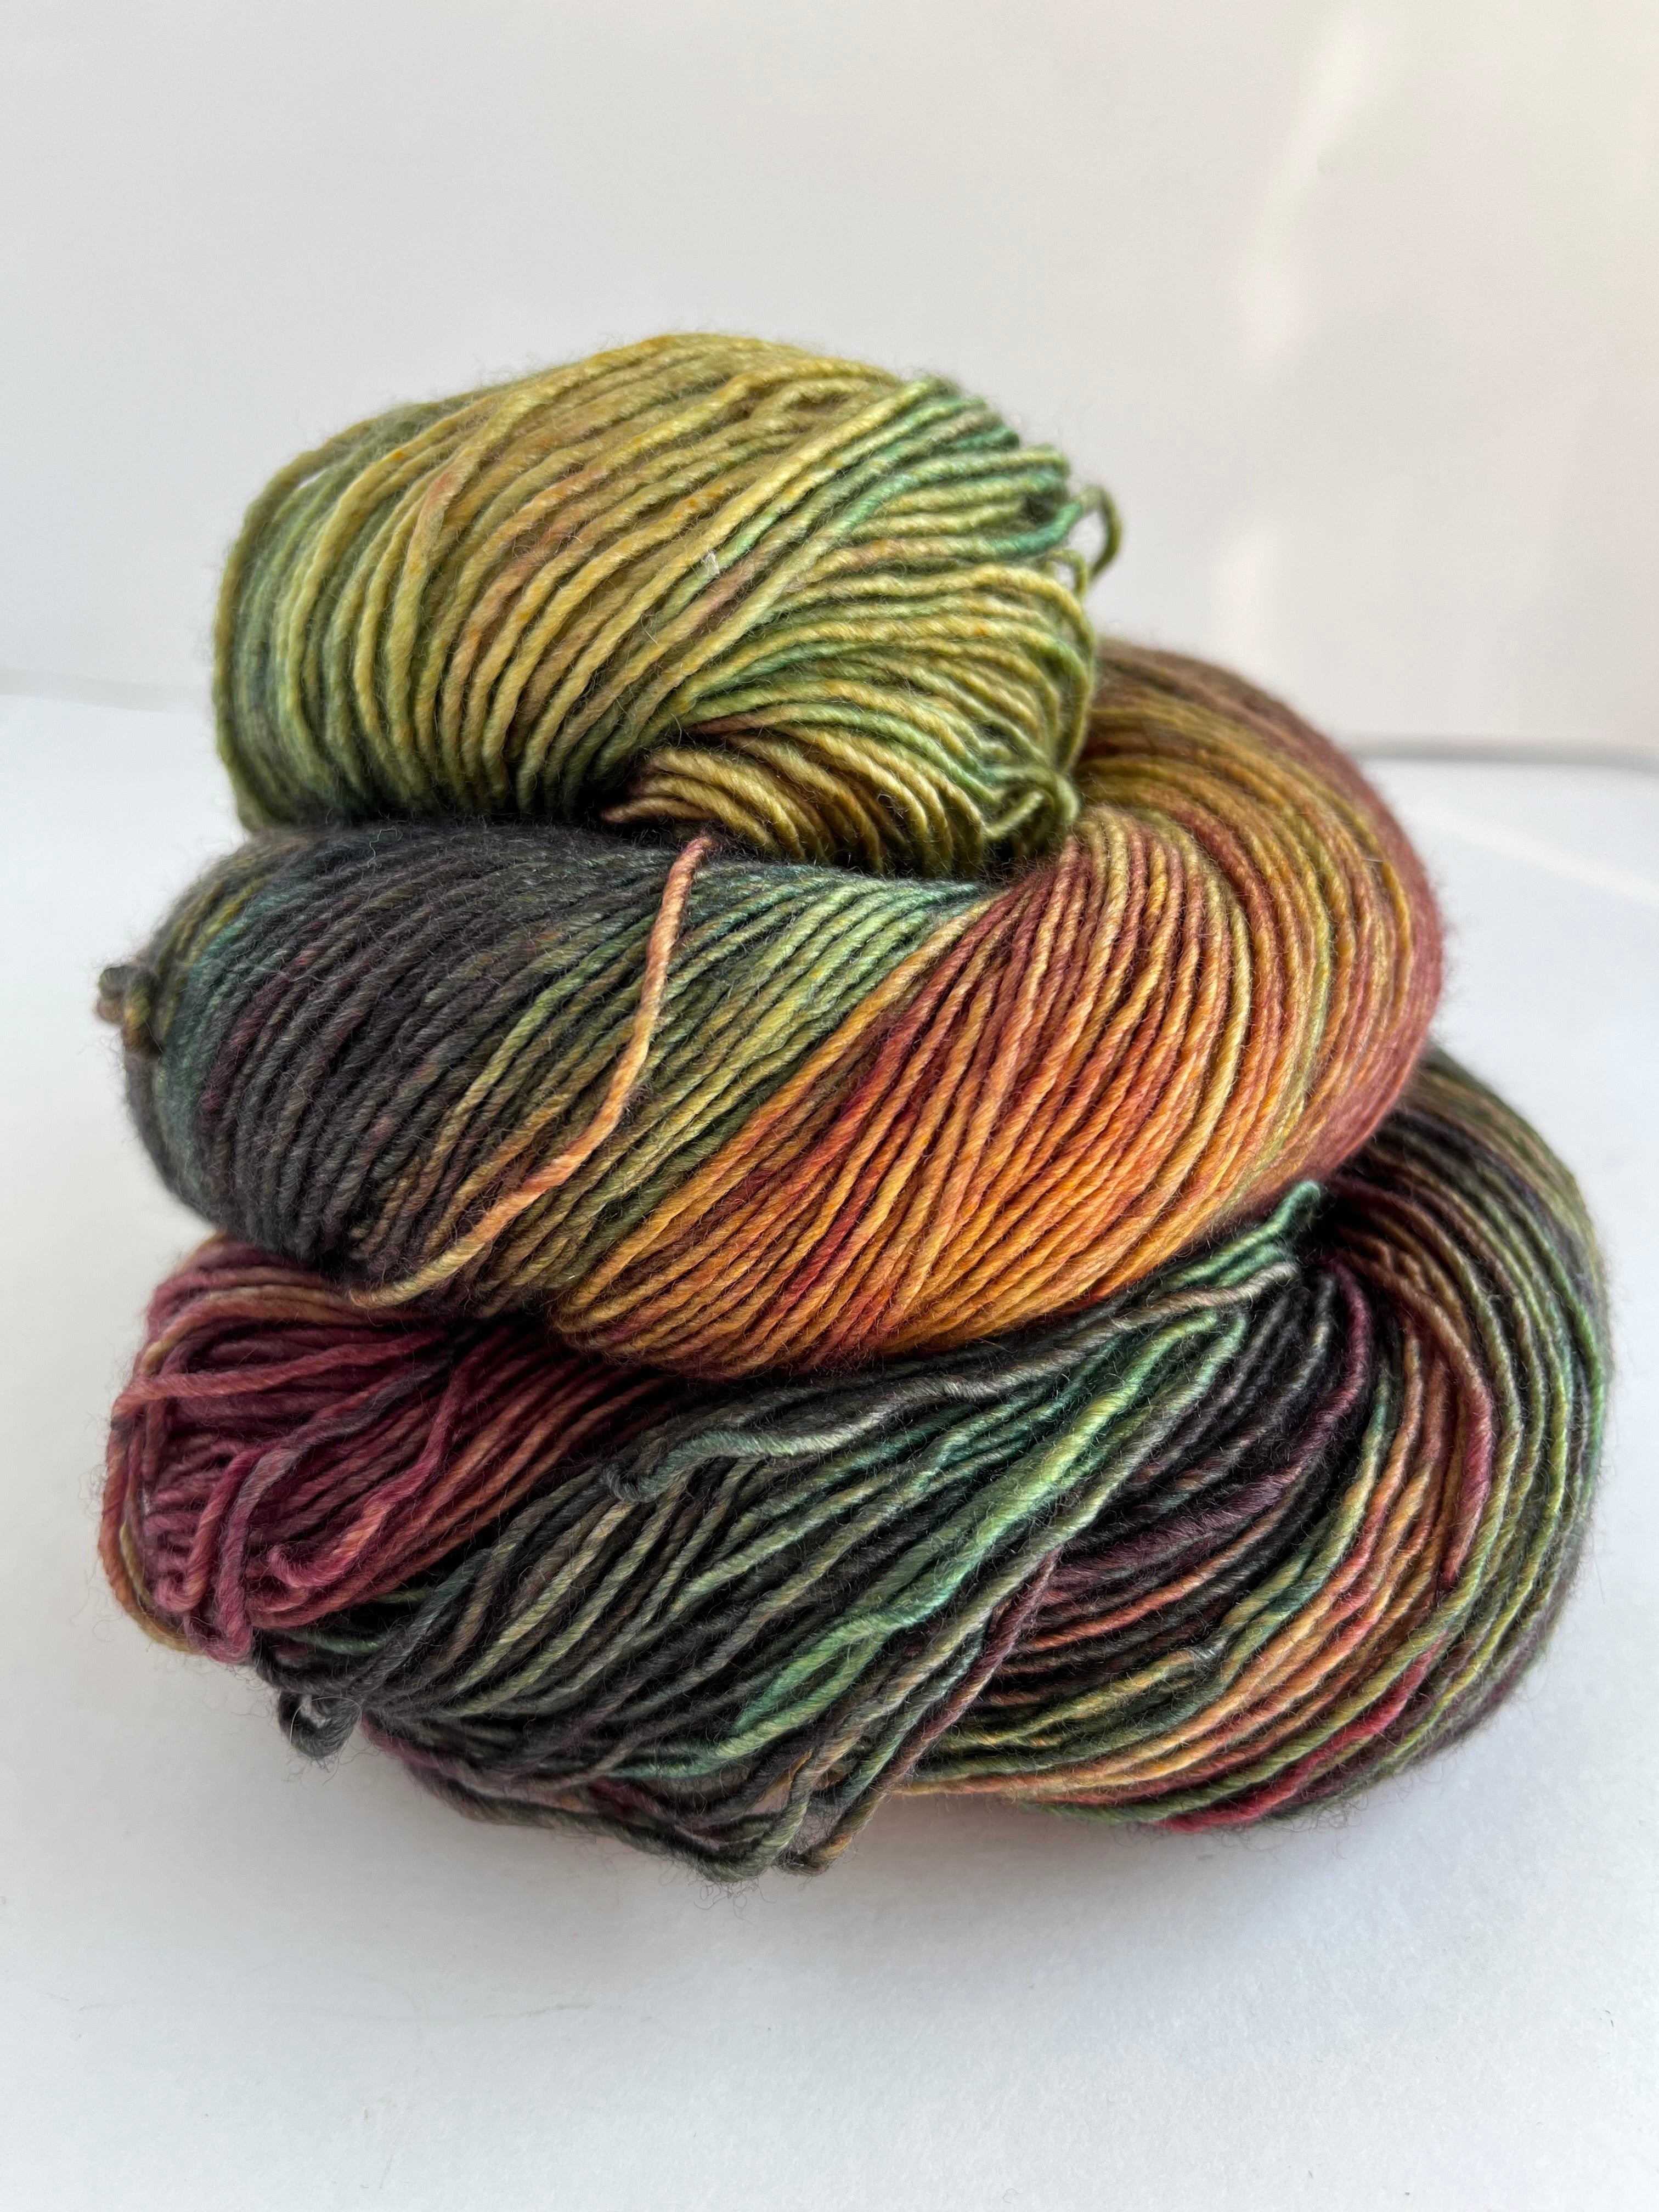 River Silk and Merino from Tributary Yarns